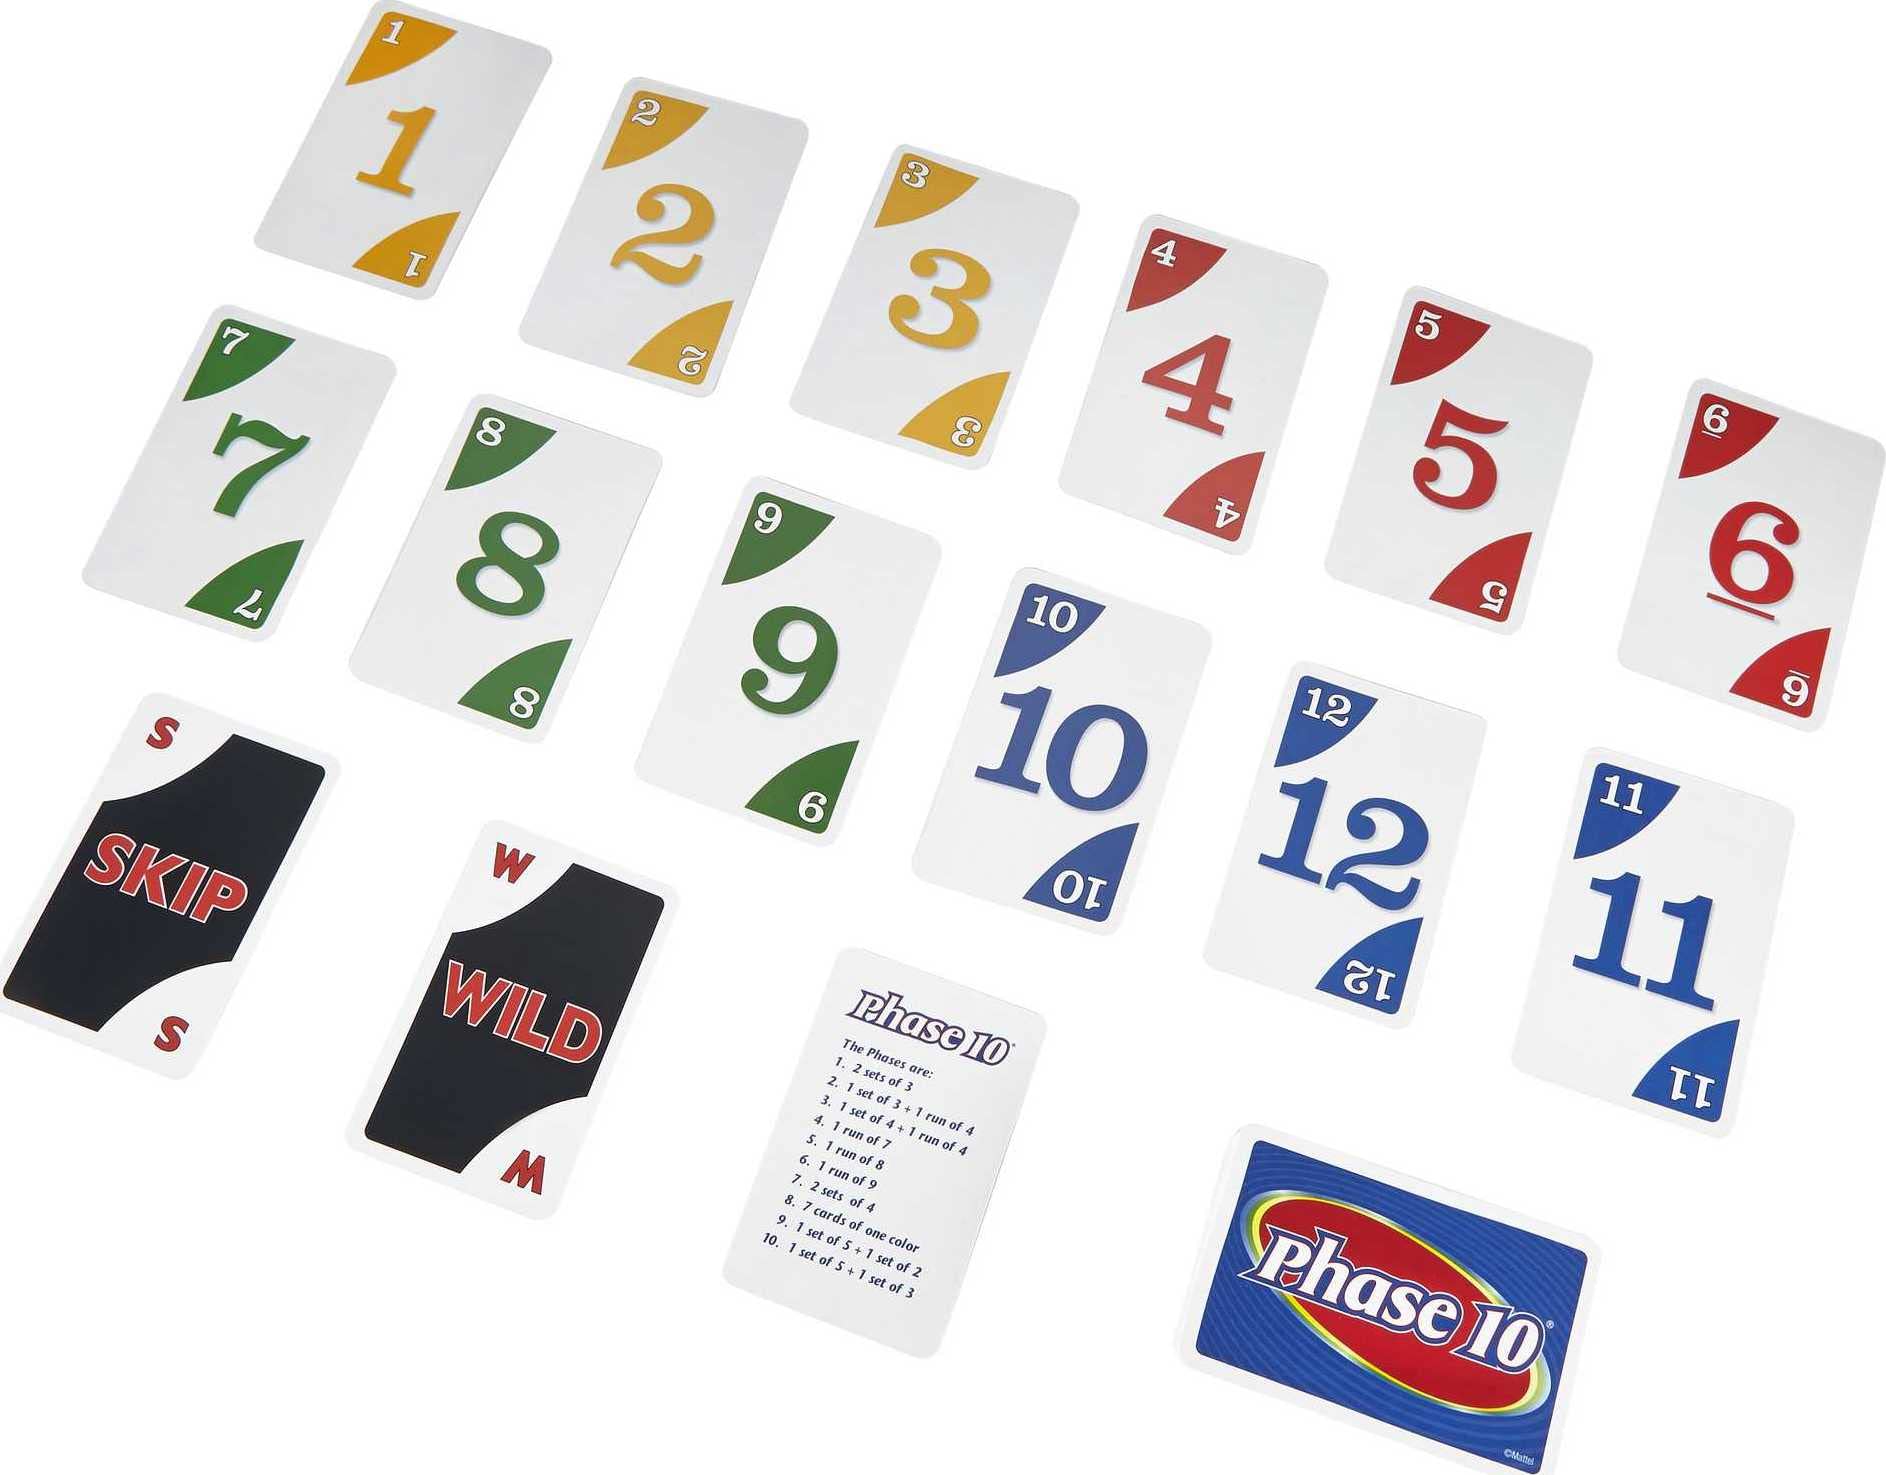 Phase 10 [Discontinued by Manufacturer] For 7 years and up